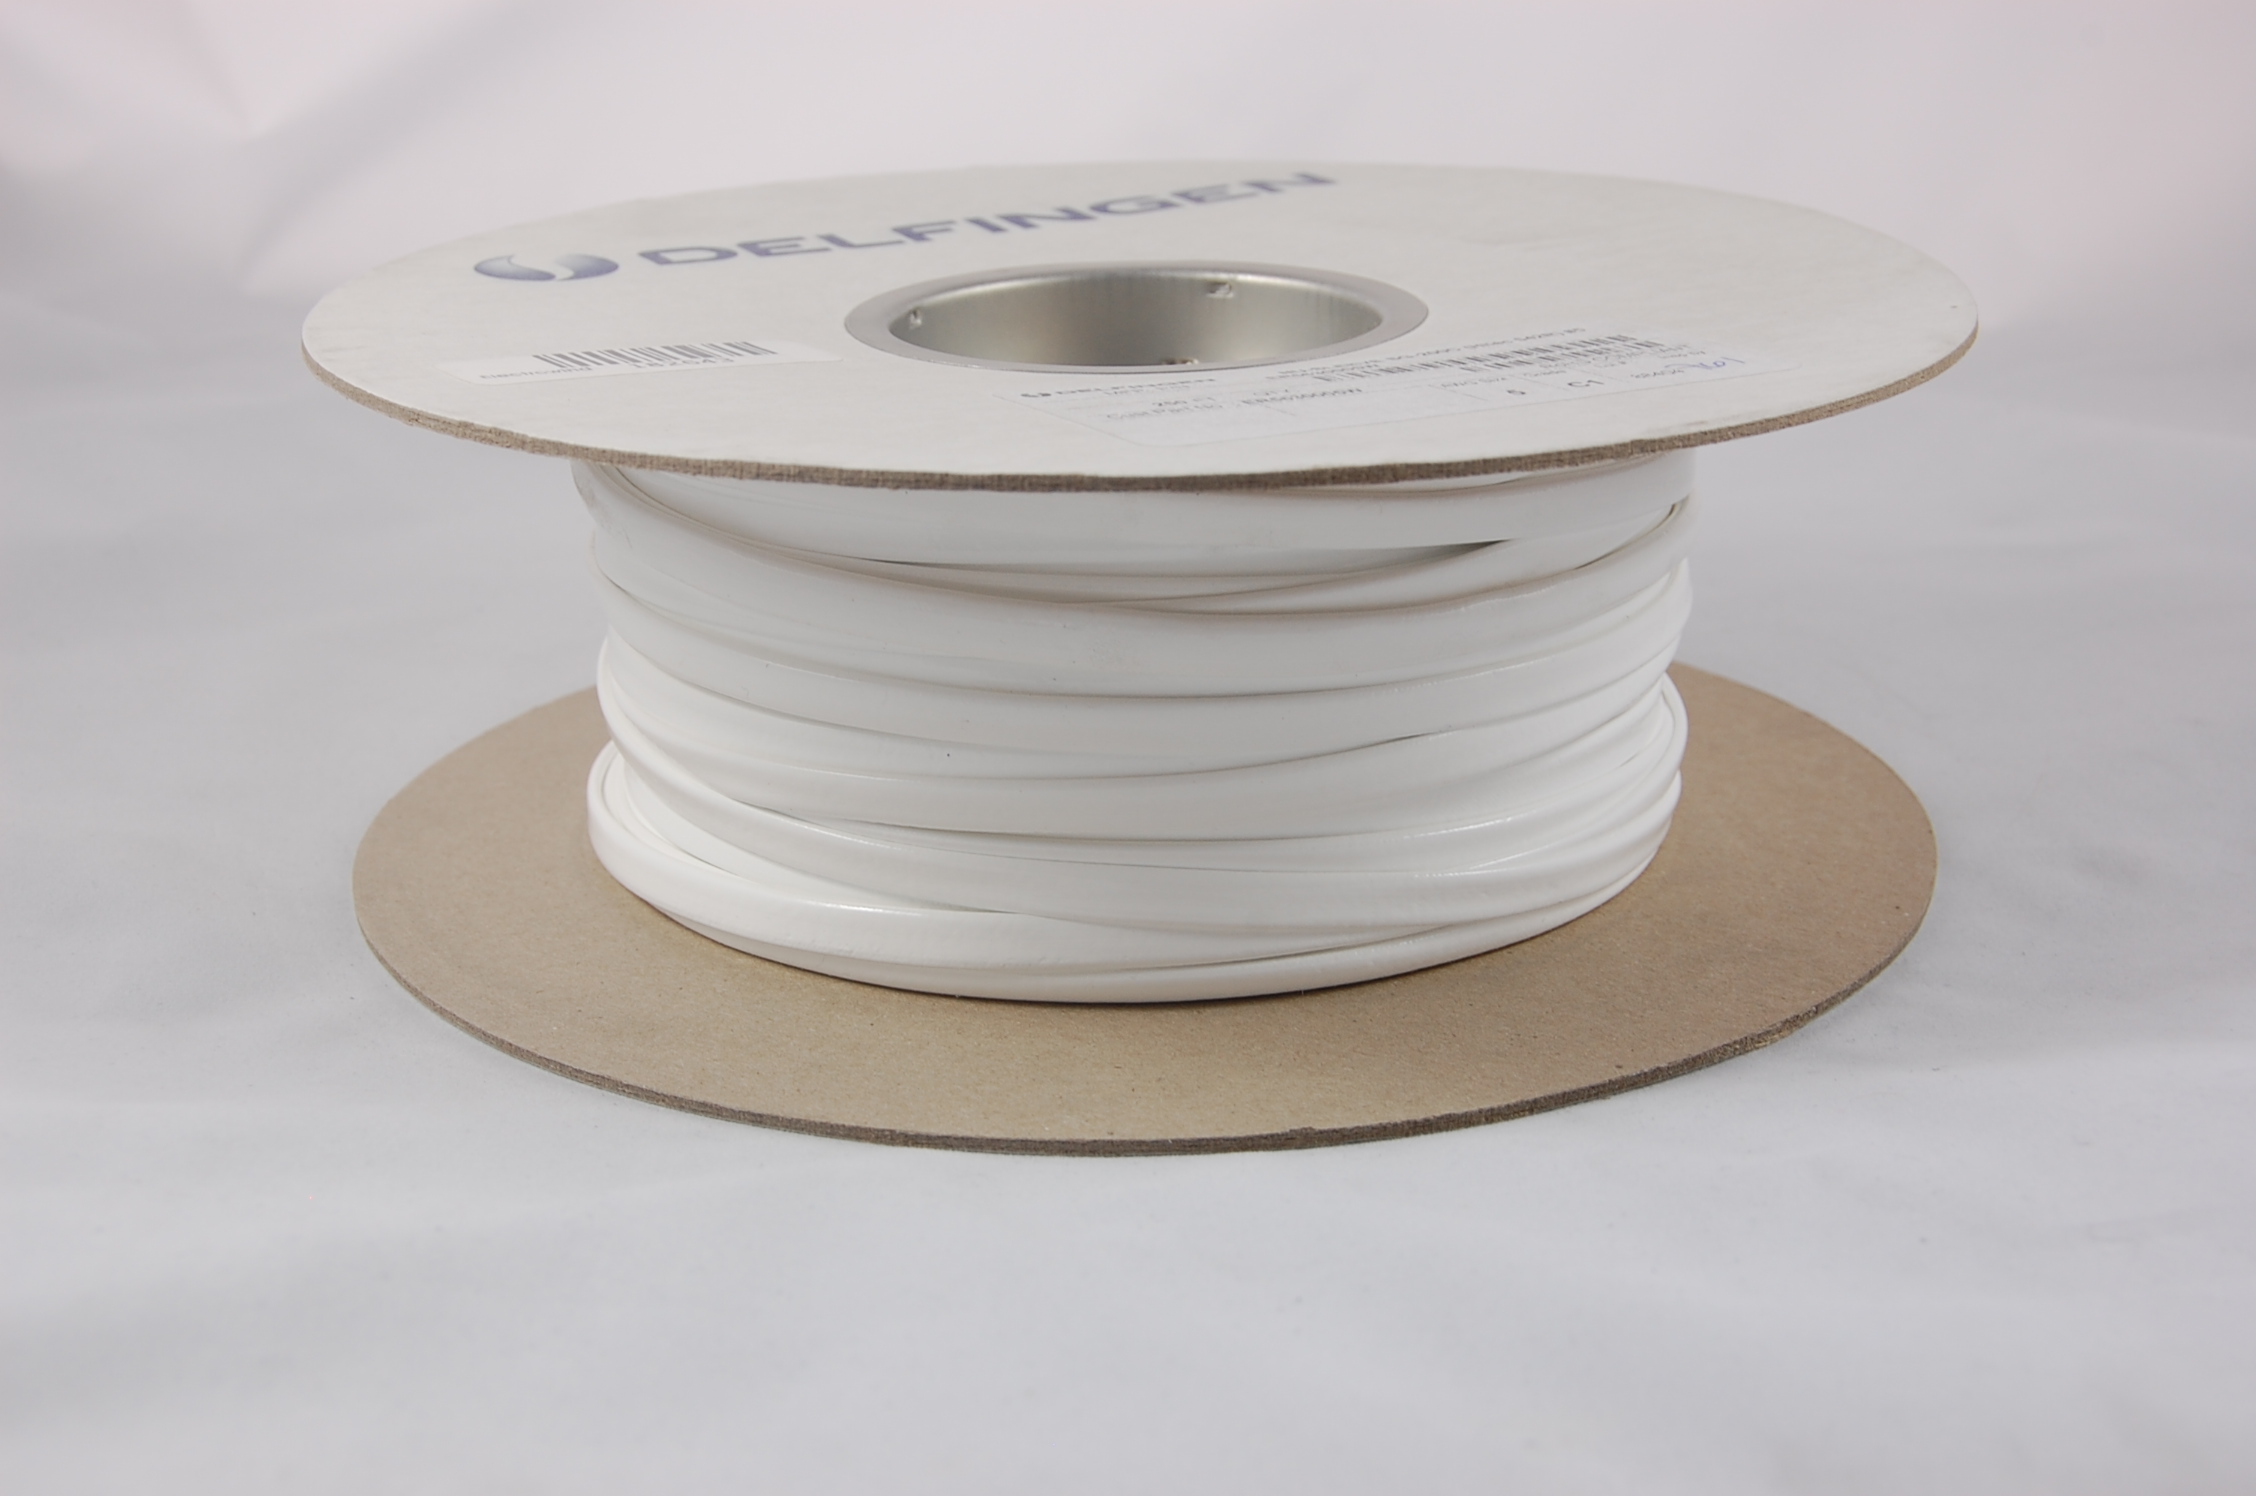 3/4" AWG NU-SLEEVE SG-200 C-1 (2500V) Silicone Rubber Coated Braided Fiberglass Sleeving (542F) 200°C, white, 100 FT per spool